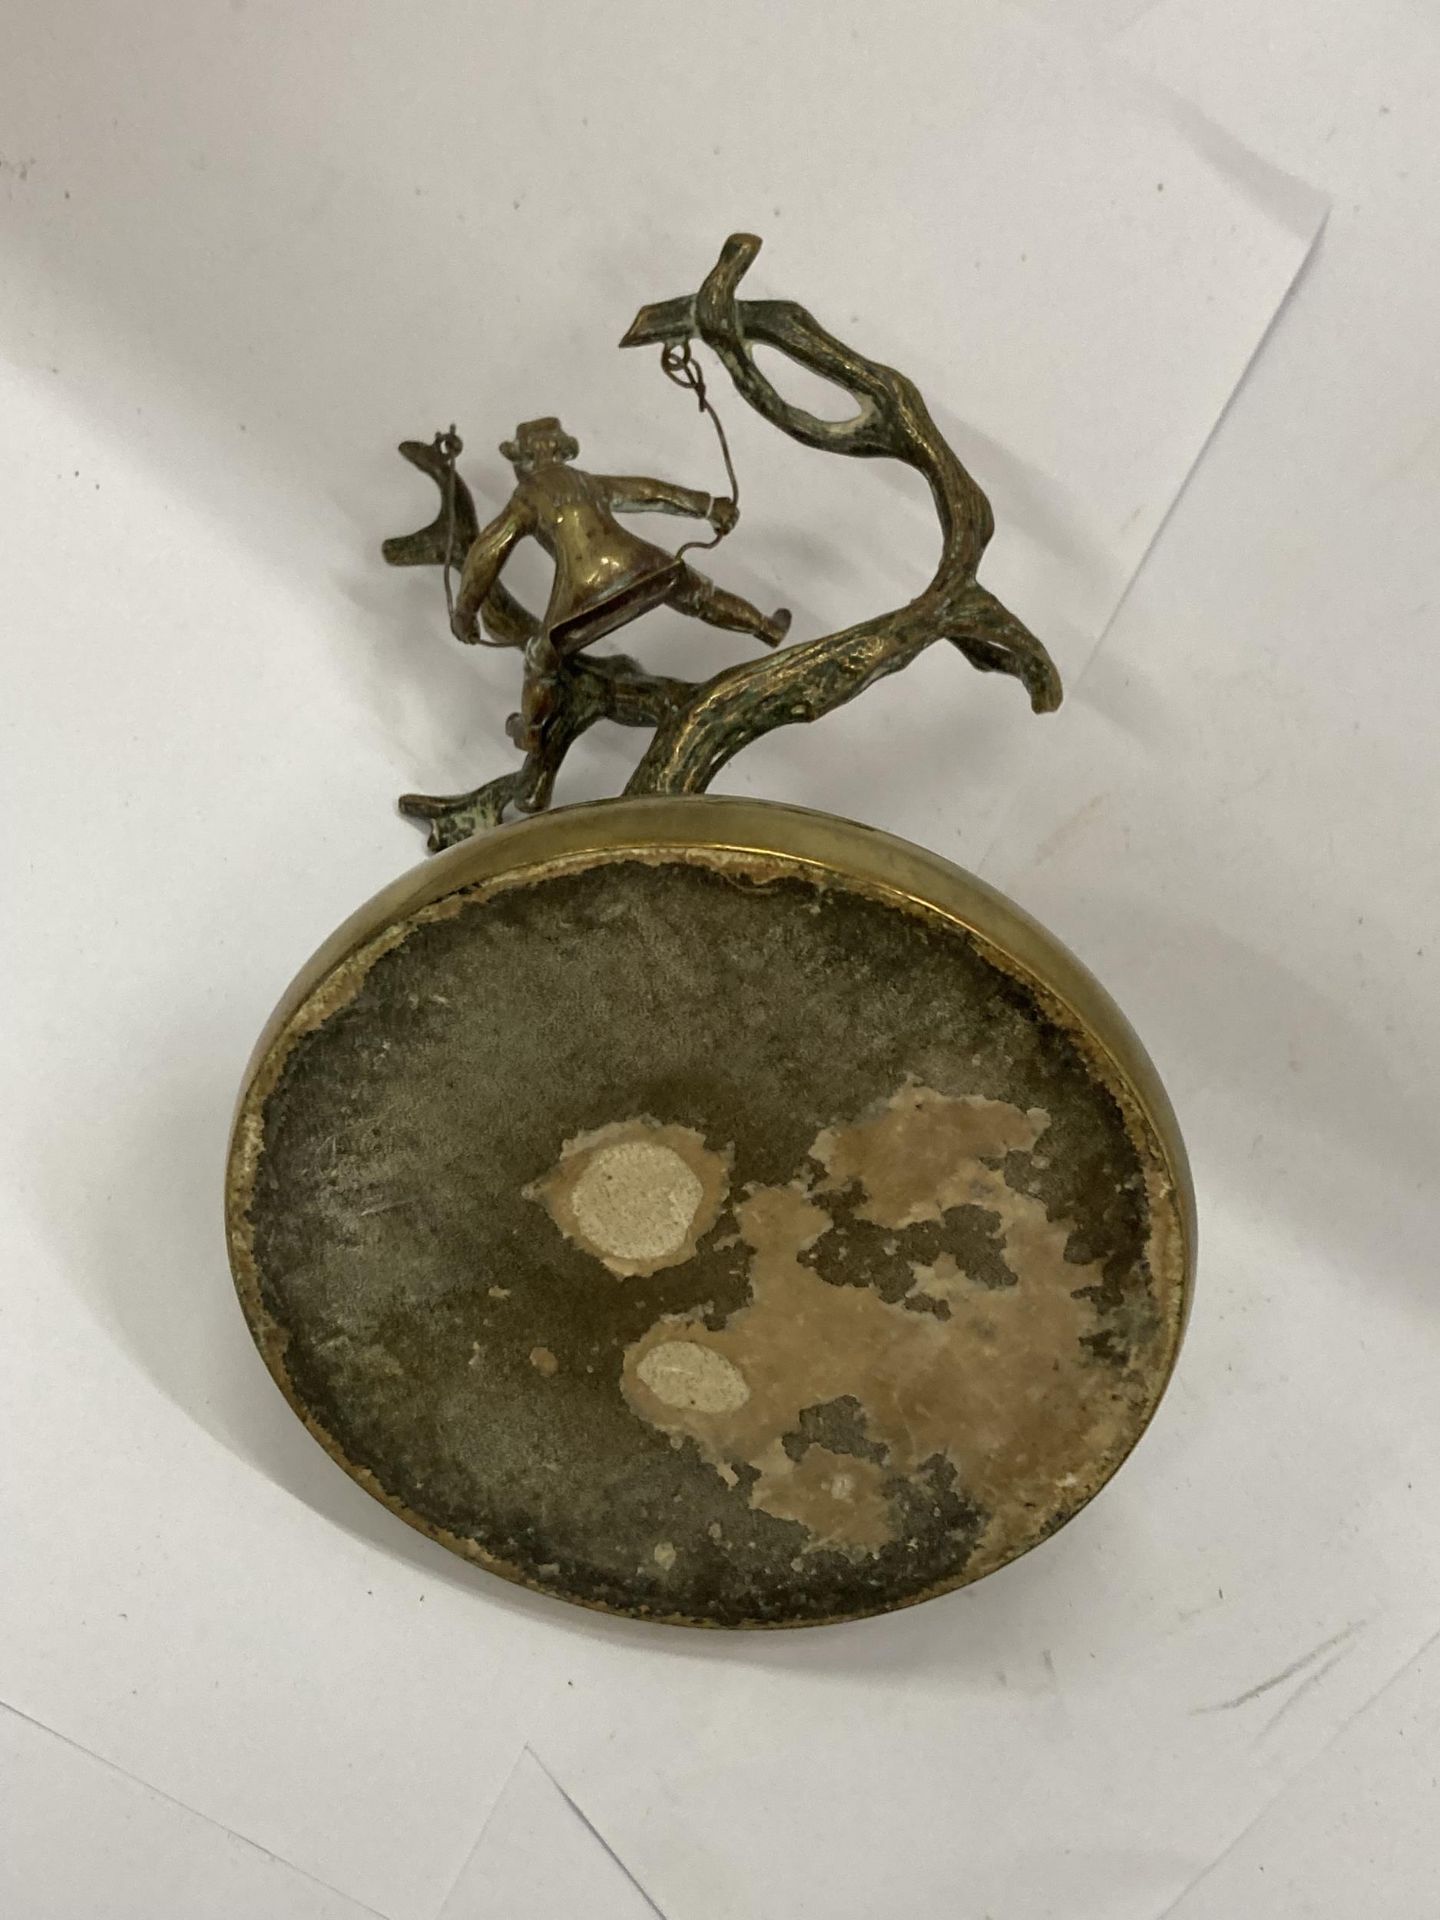 A VINTAGE NOVELTY BRASS INKWELL WITH A SINGING BOY IN A TREE - Image 4 of 4